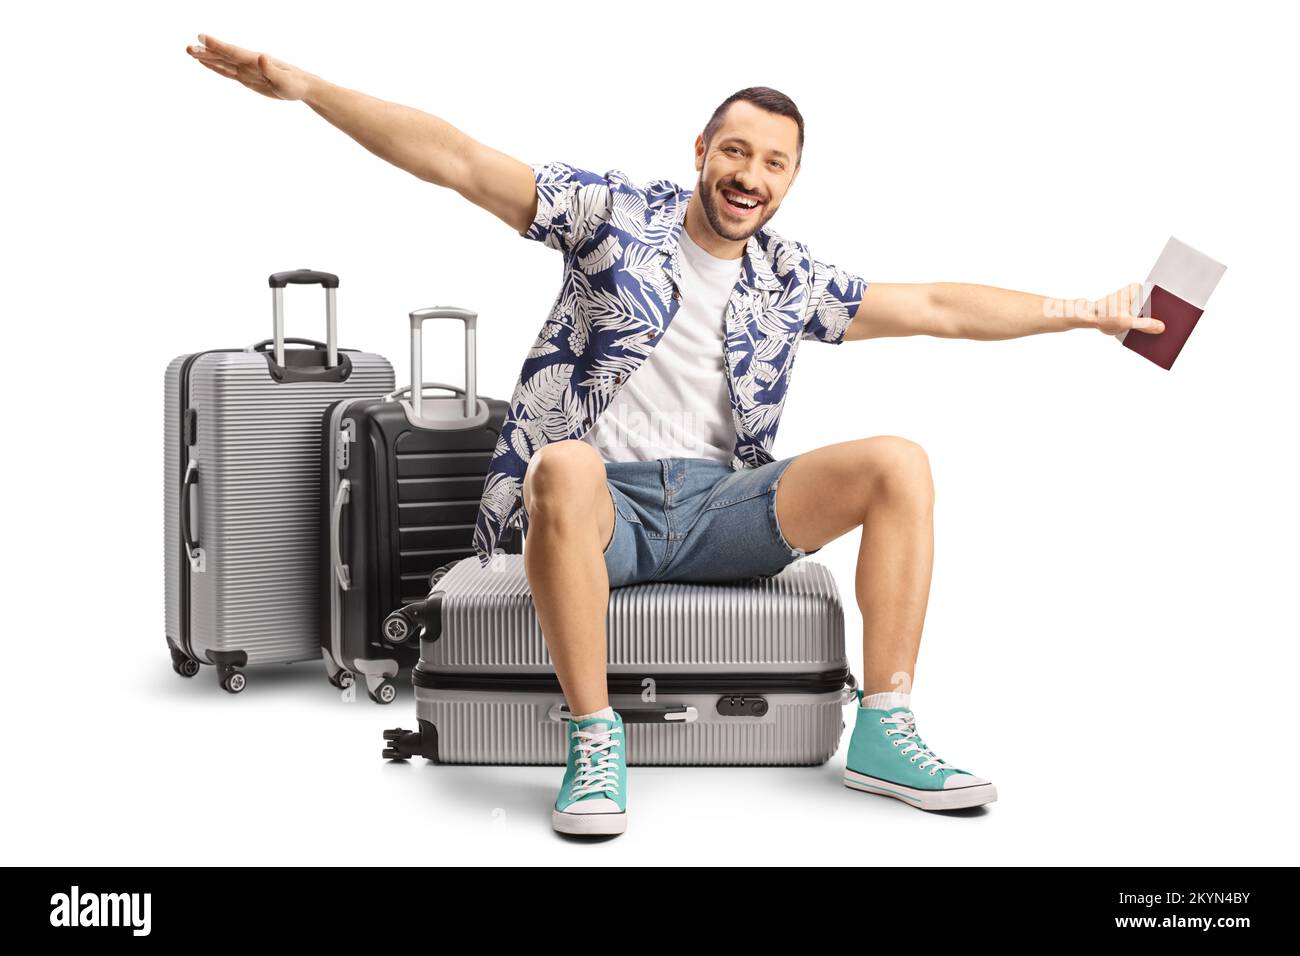 Male tourist sitting on a suitcase and spreading arms to fly isolated on white background Stock Photo